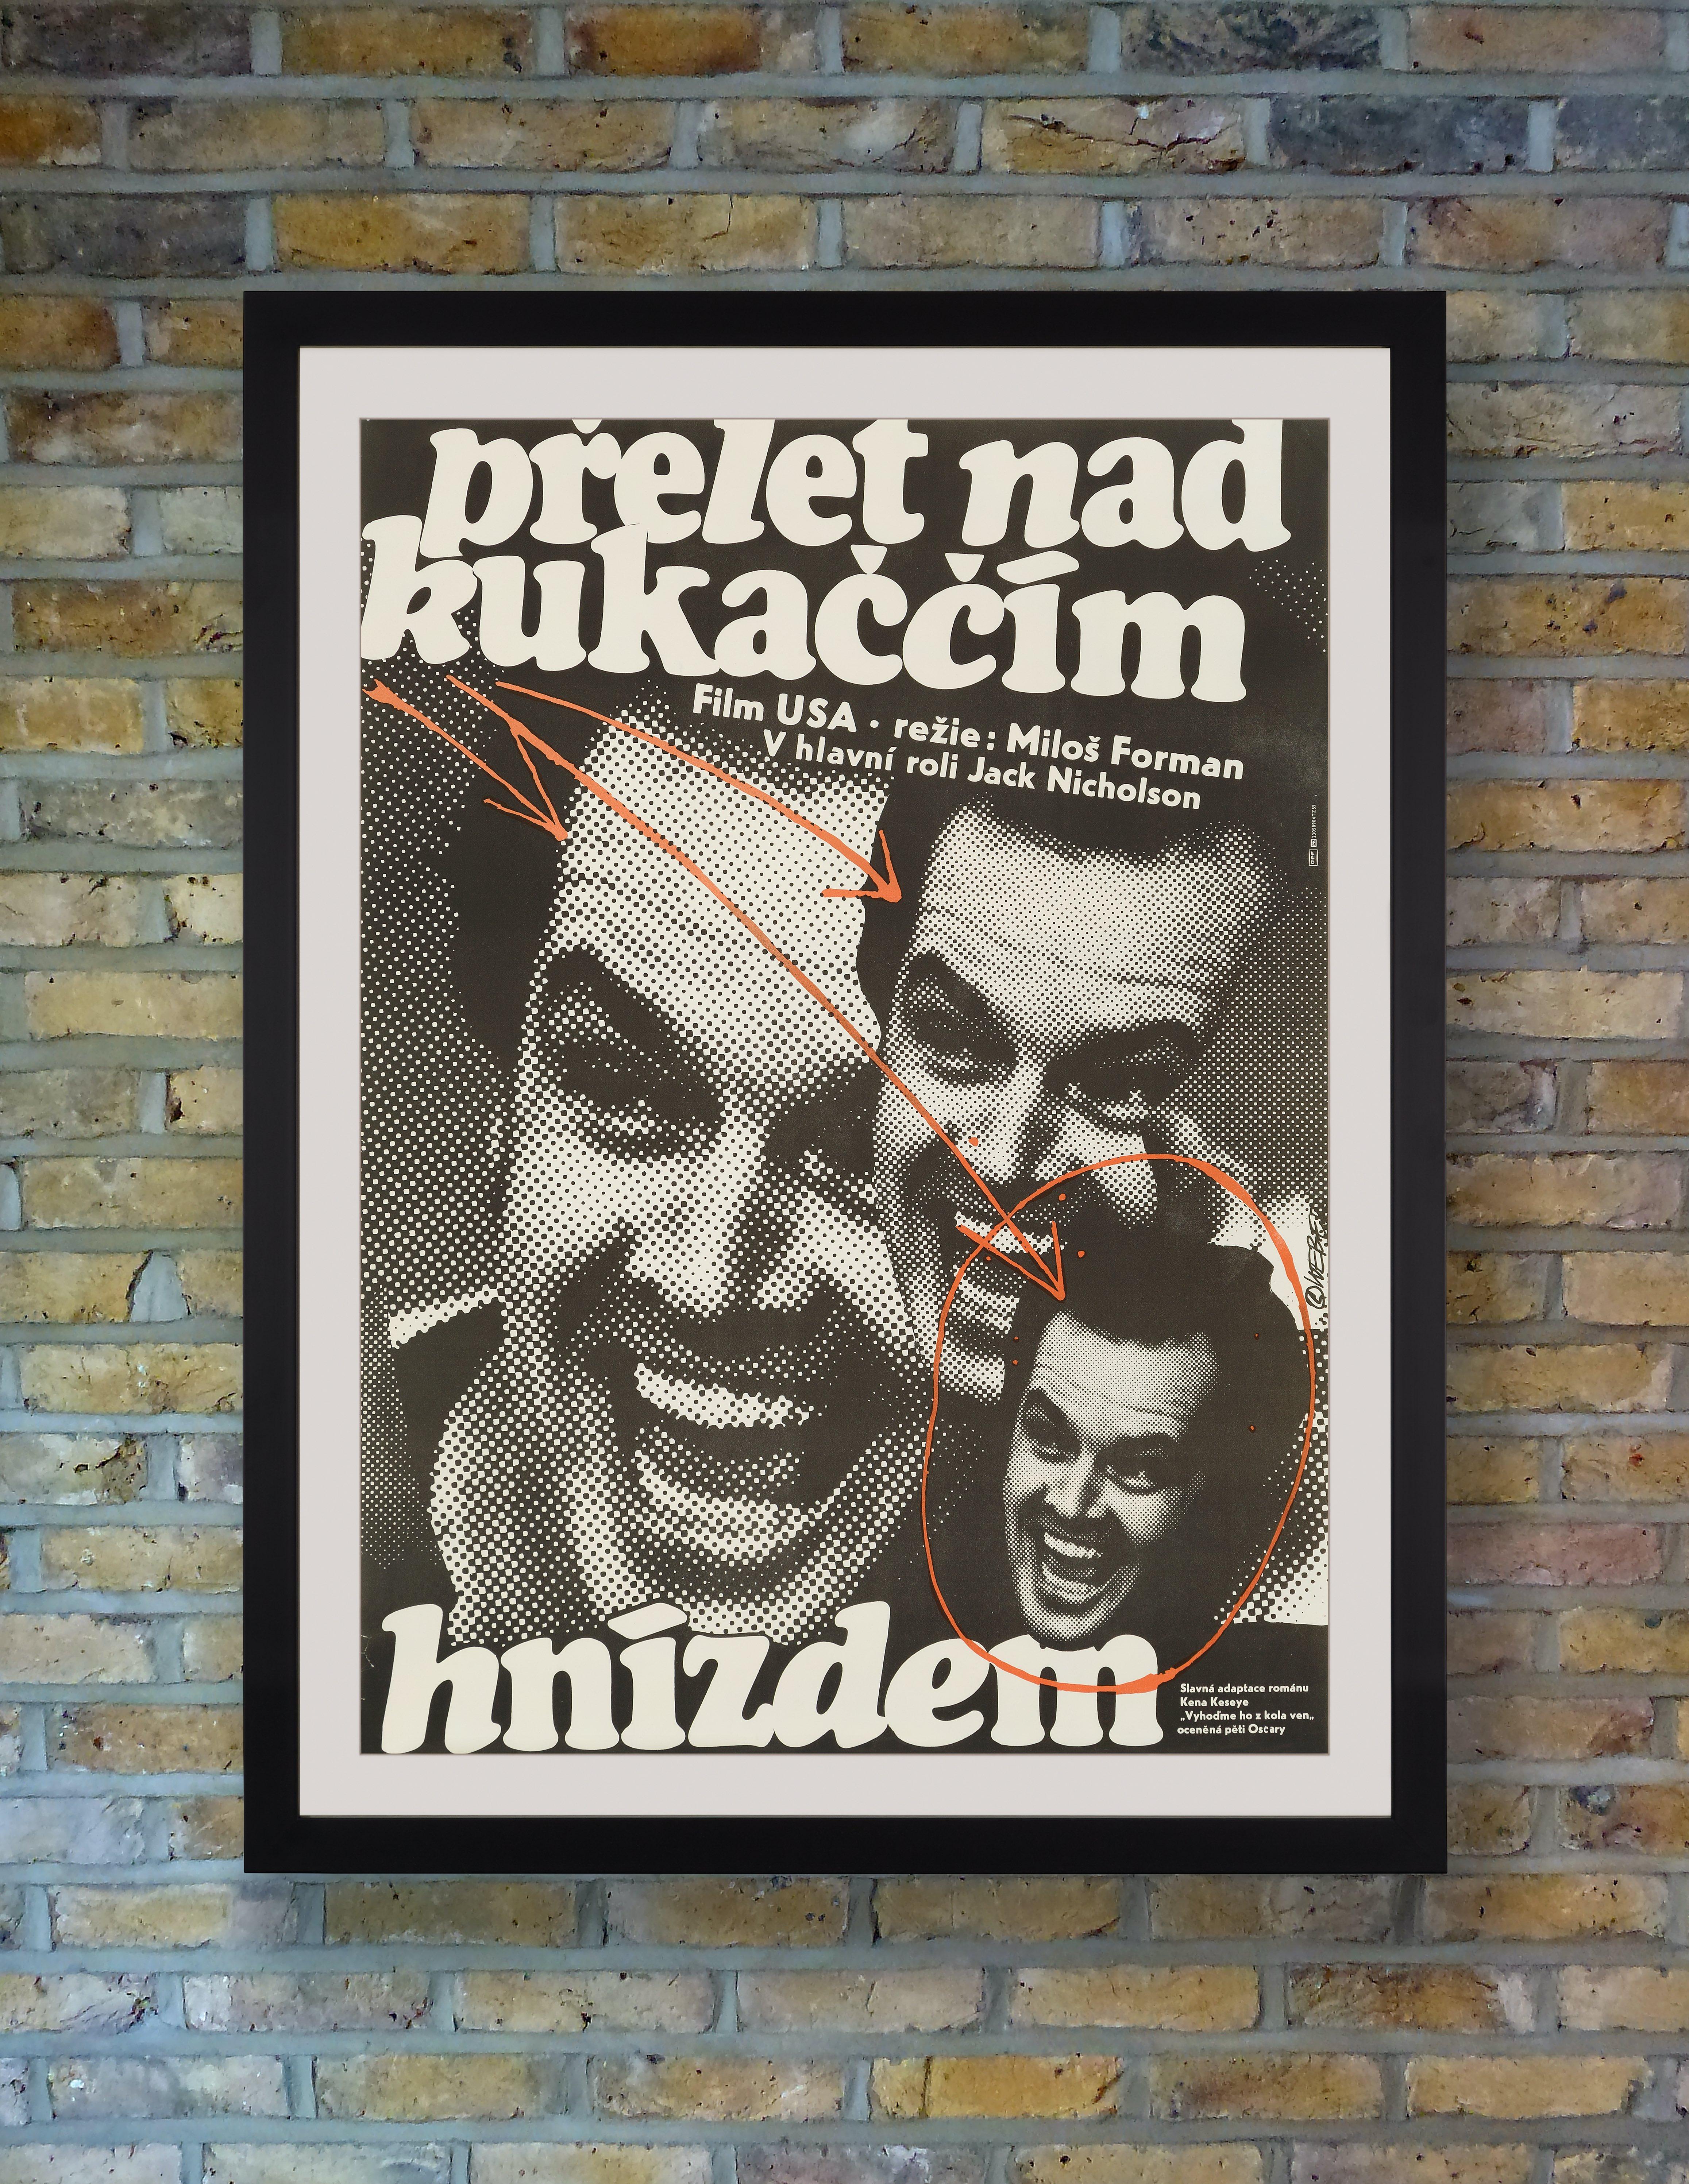 A fantastically bizarre poster by Jan Weber for the first Czech release of 